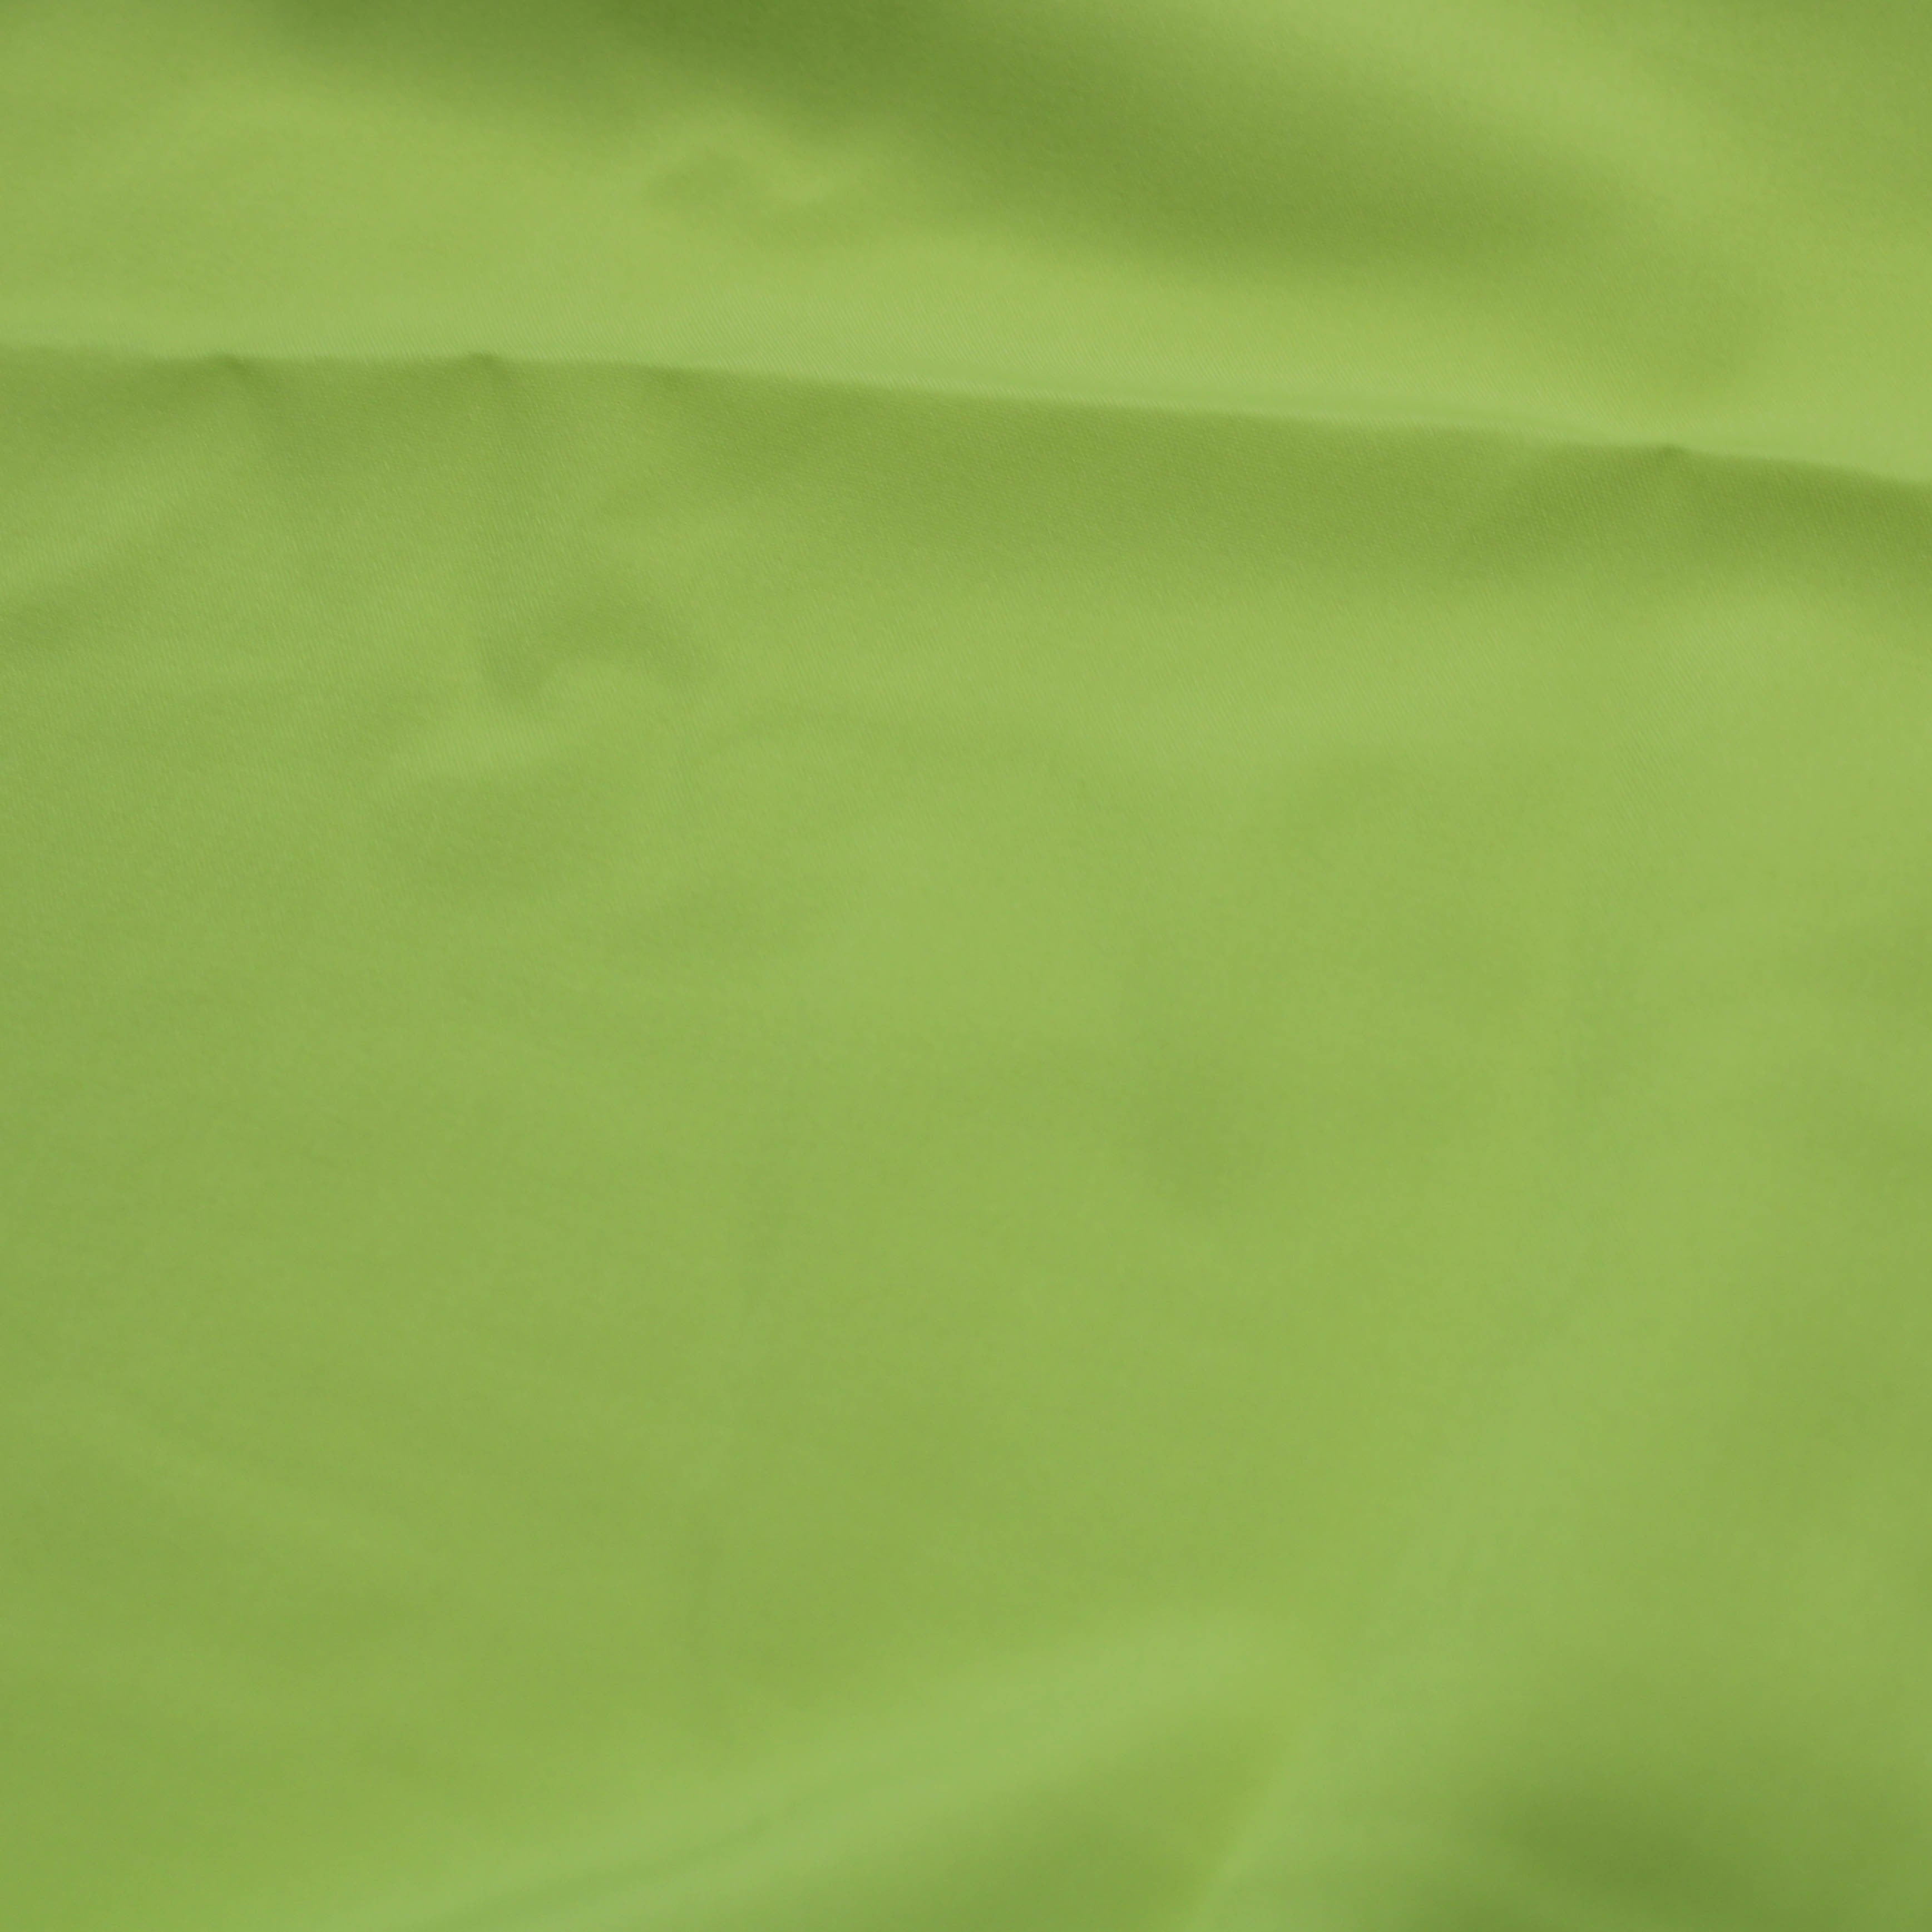 Green Moss Silex Polyester Spandex Fabric by the Yard Style 793 